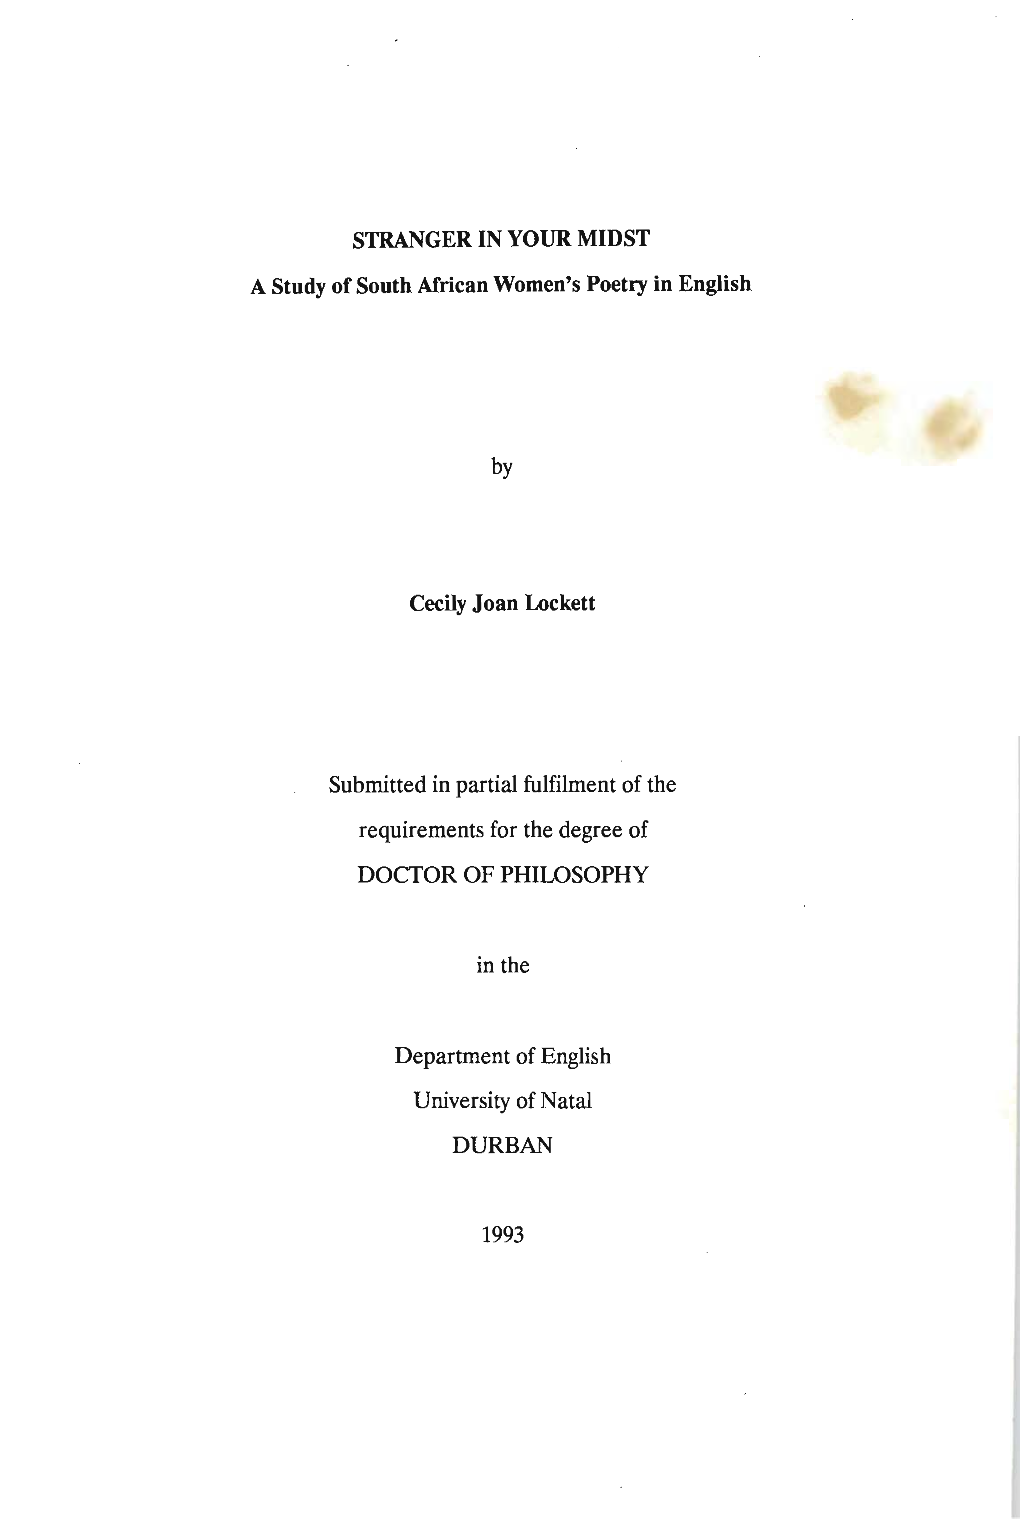 Thesis Represents the First Extended Study of South African Poetry in English from a Gender Perspective